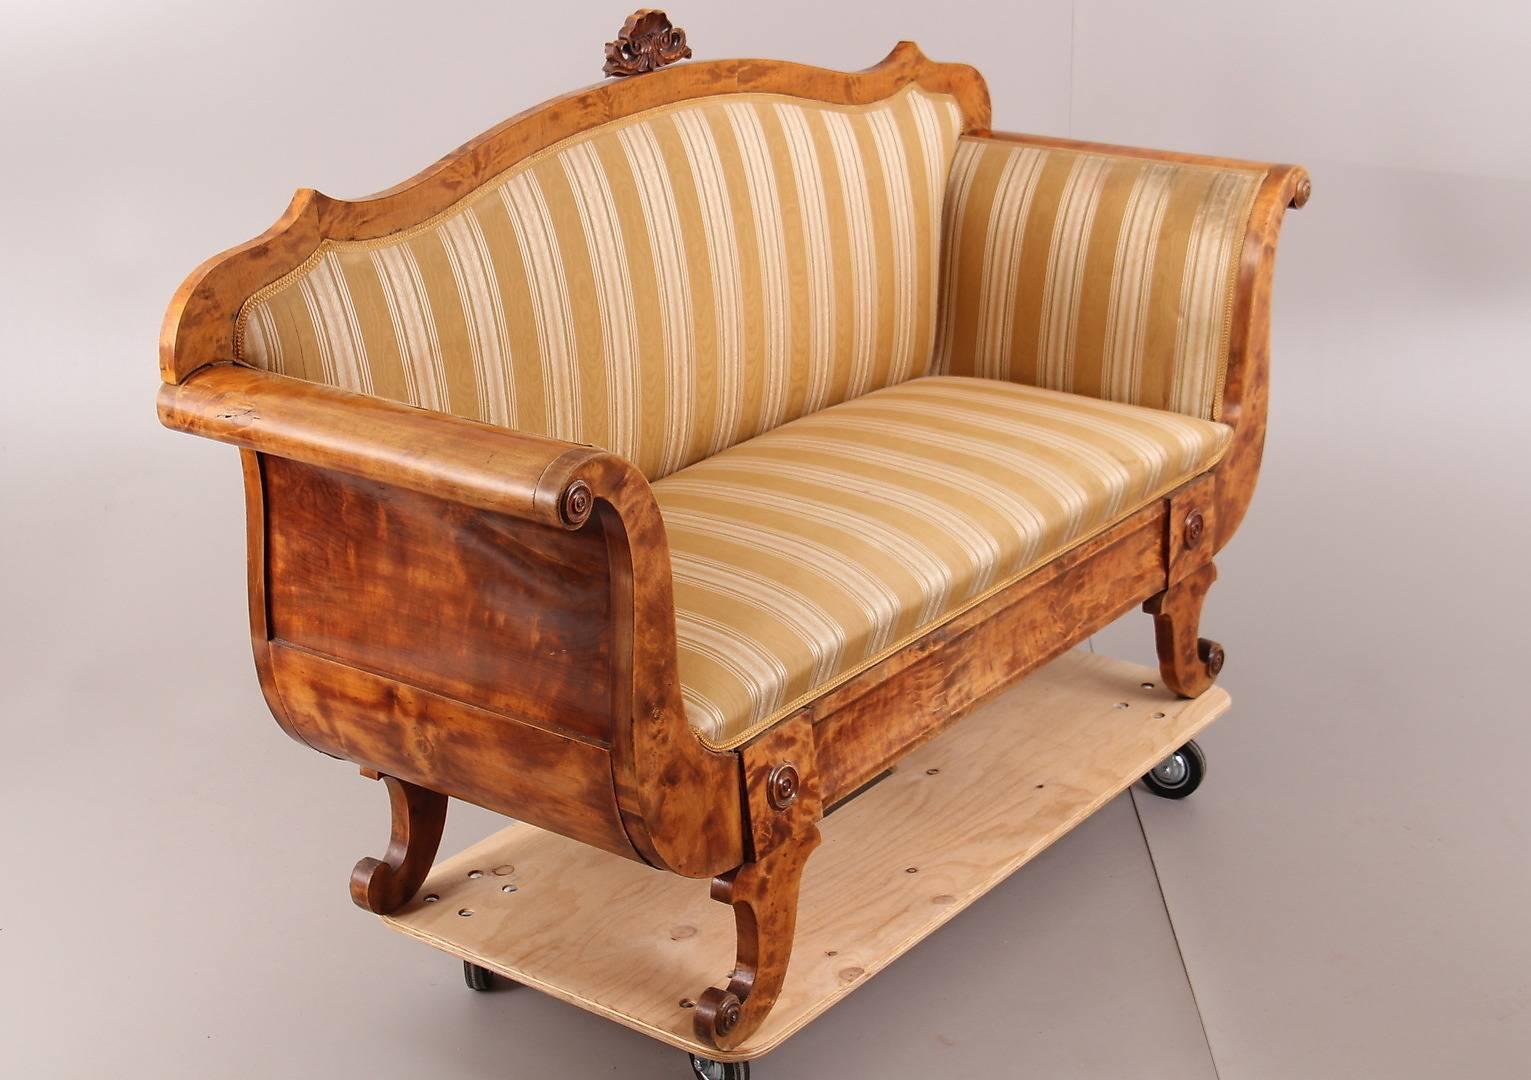 Antique Swedish Biedermeier Empire smaller sofa couch with a highly carved shape and stunning shell motif on the top.

There are smaller carved details above the gracefully curved legs and roundels on the end of the swooping arms.

The sofa